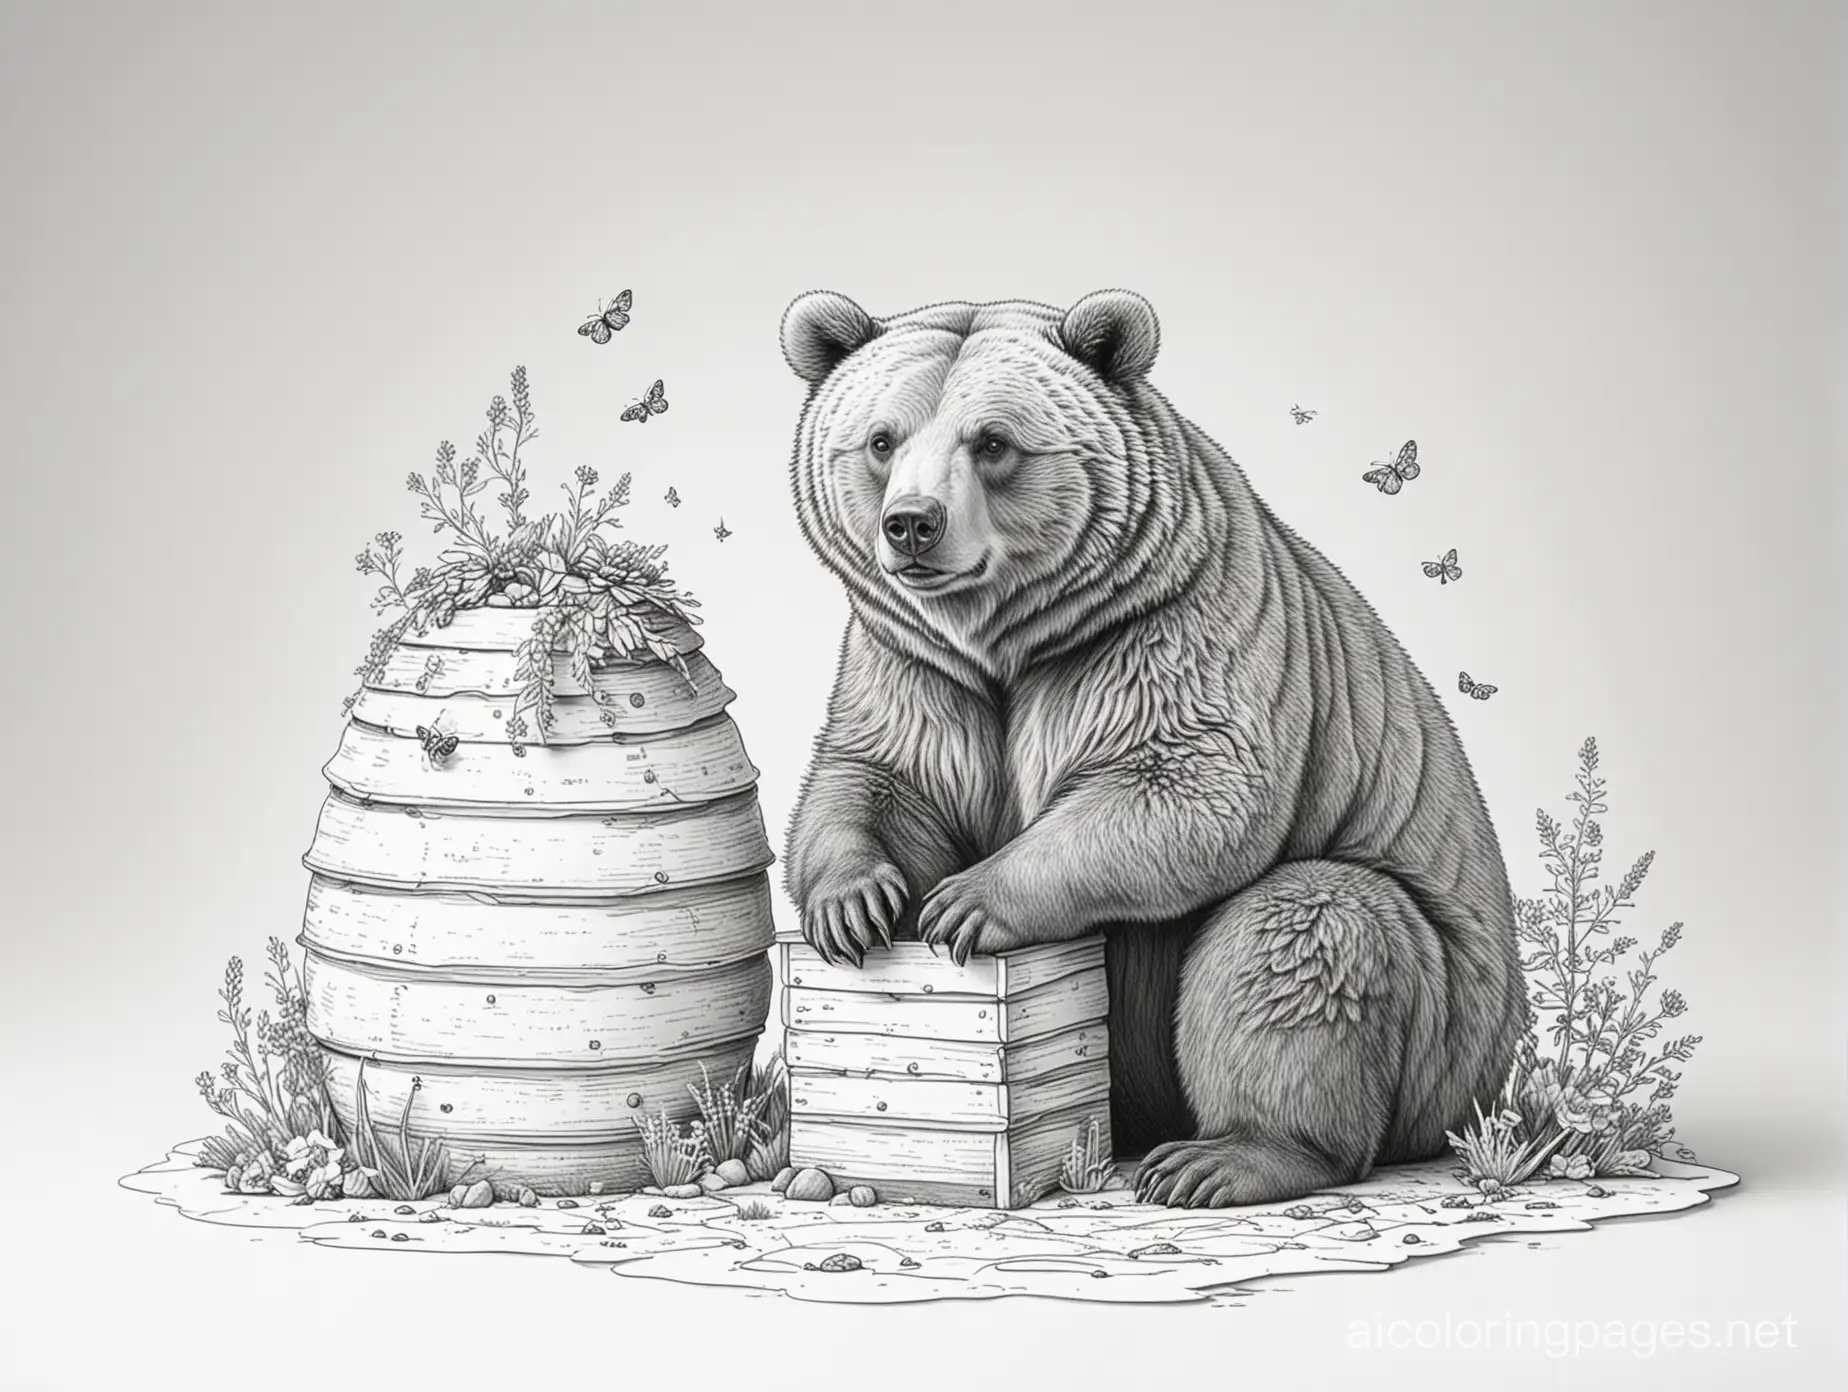 A grizzly bear sitting on a beehive, Coloring Page, black and white, line art, white background, Simplicity, Ample White Space. The background of the coloring page is plain white to make it easy for young children to color within the lines. The outlines of all the subjects are easy to distinguish, making it simple for kids to color without too much difficulty